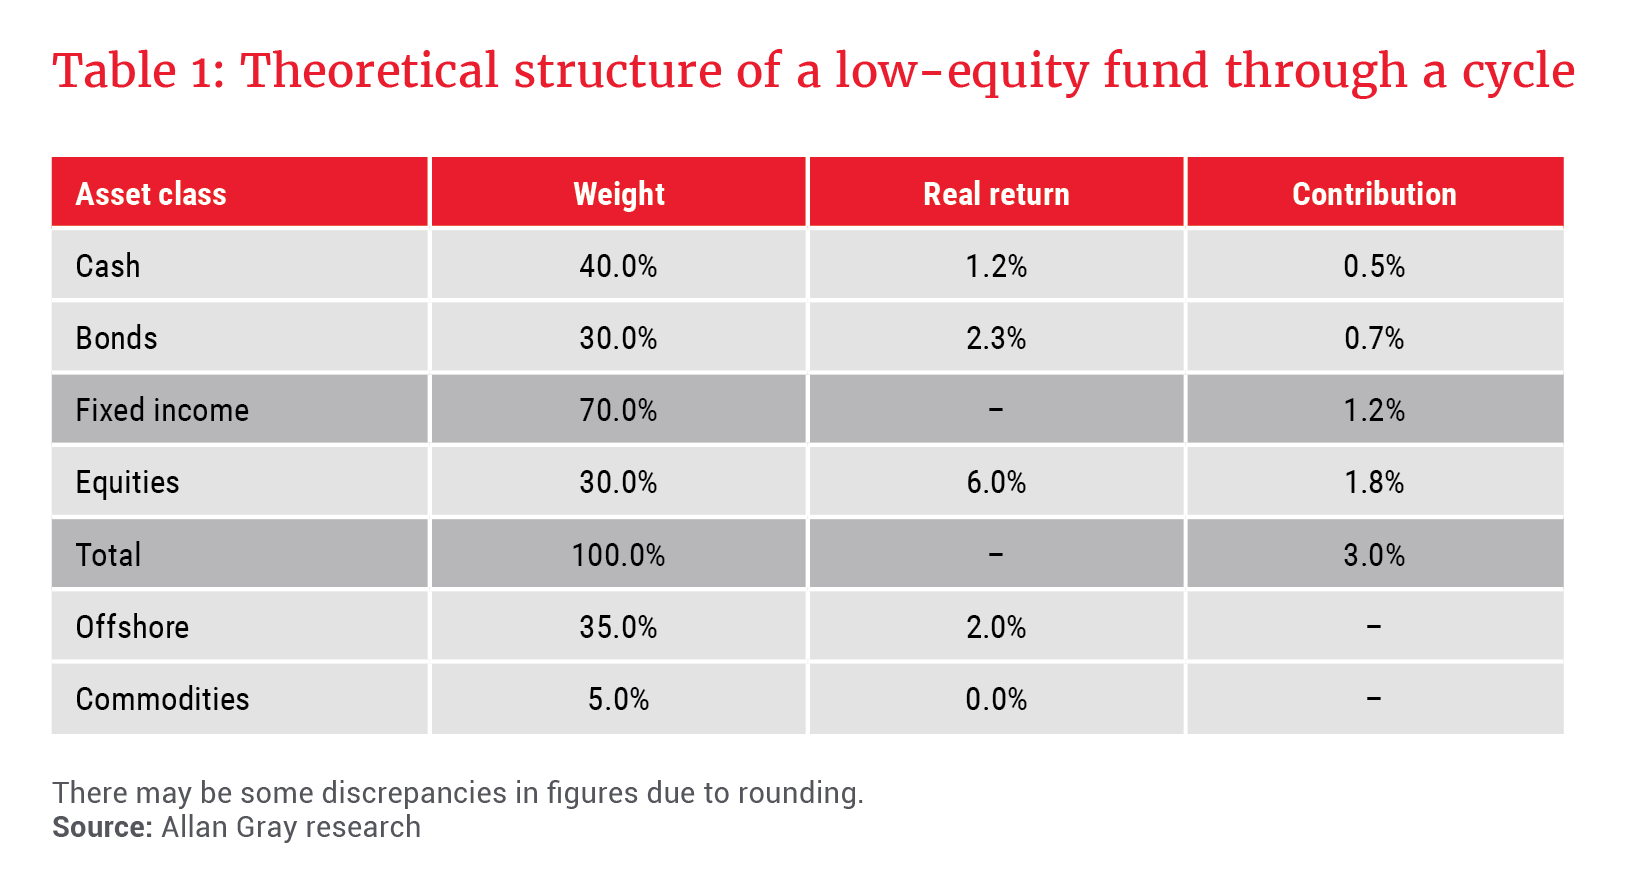 Theoretical structure of low-equity fund through a cycle - Allan Gray